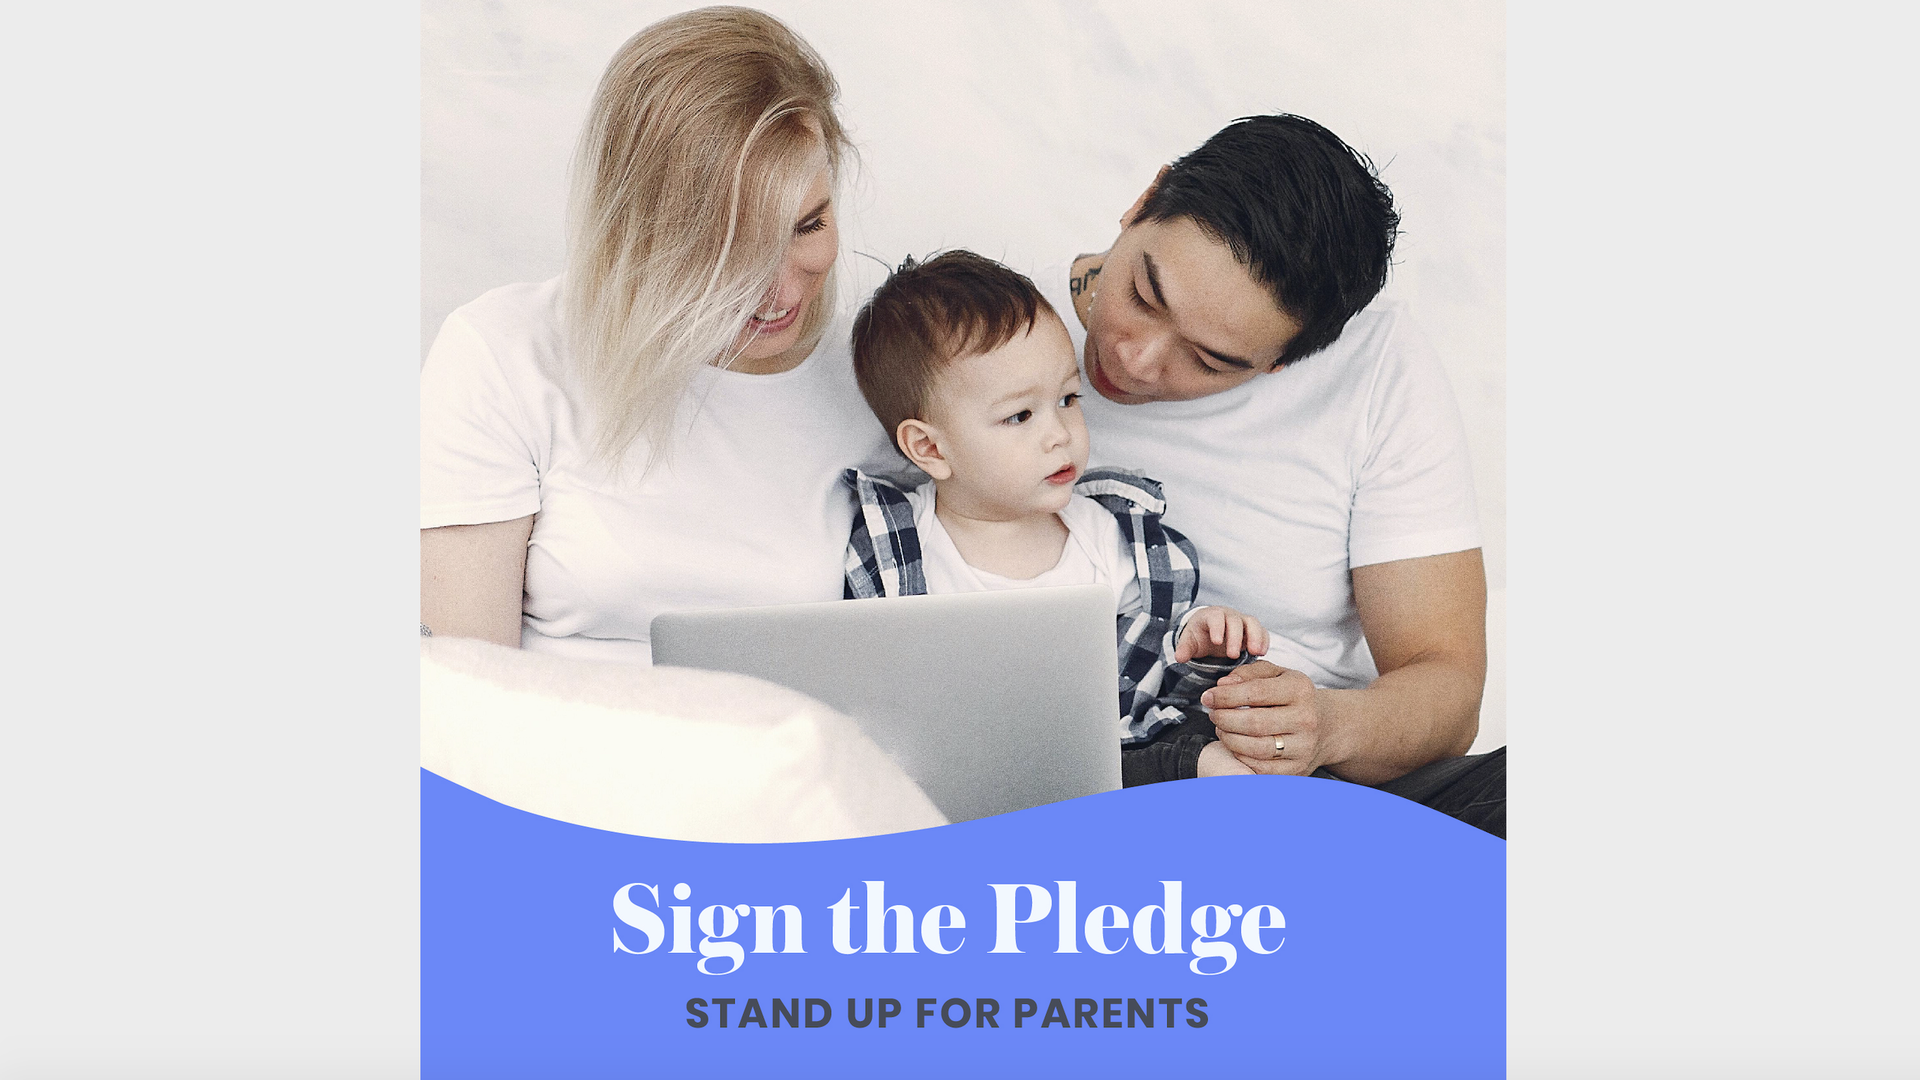 A flyer with a photo of a family asking people to sign a pledge.